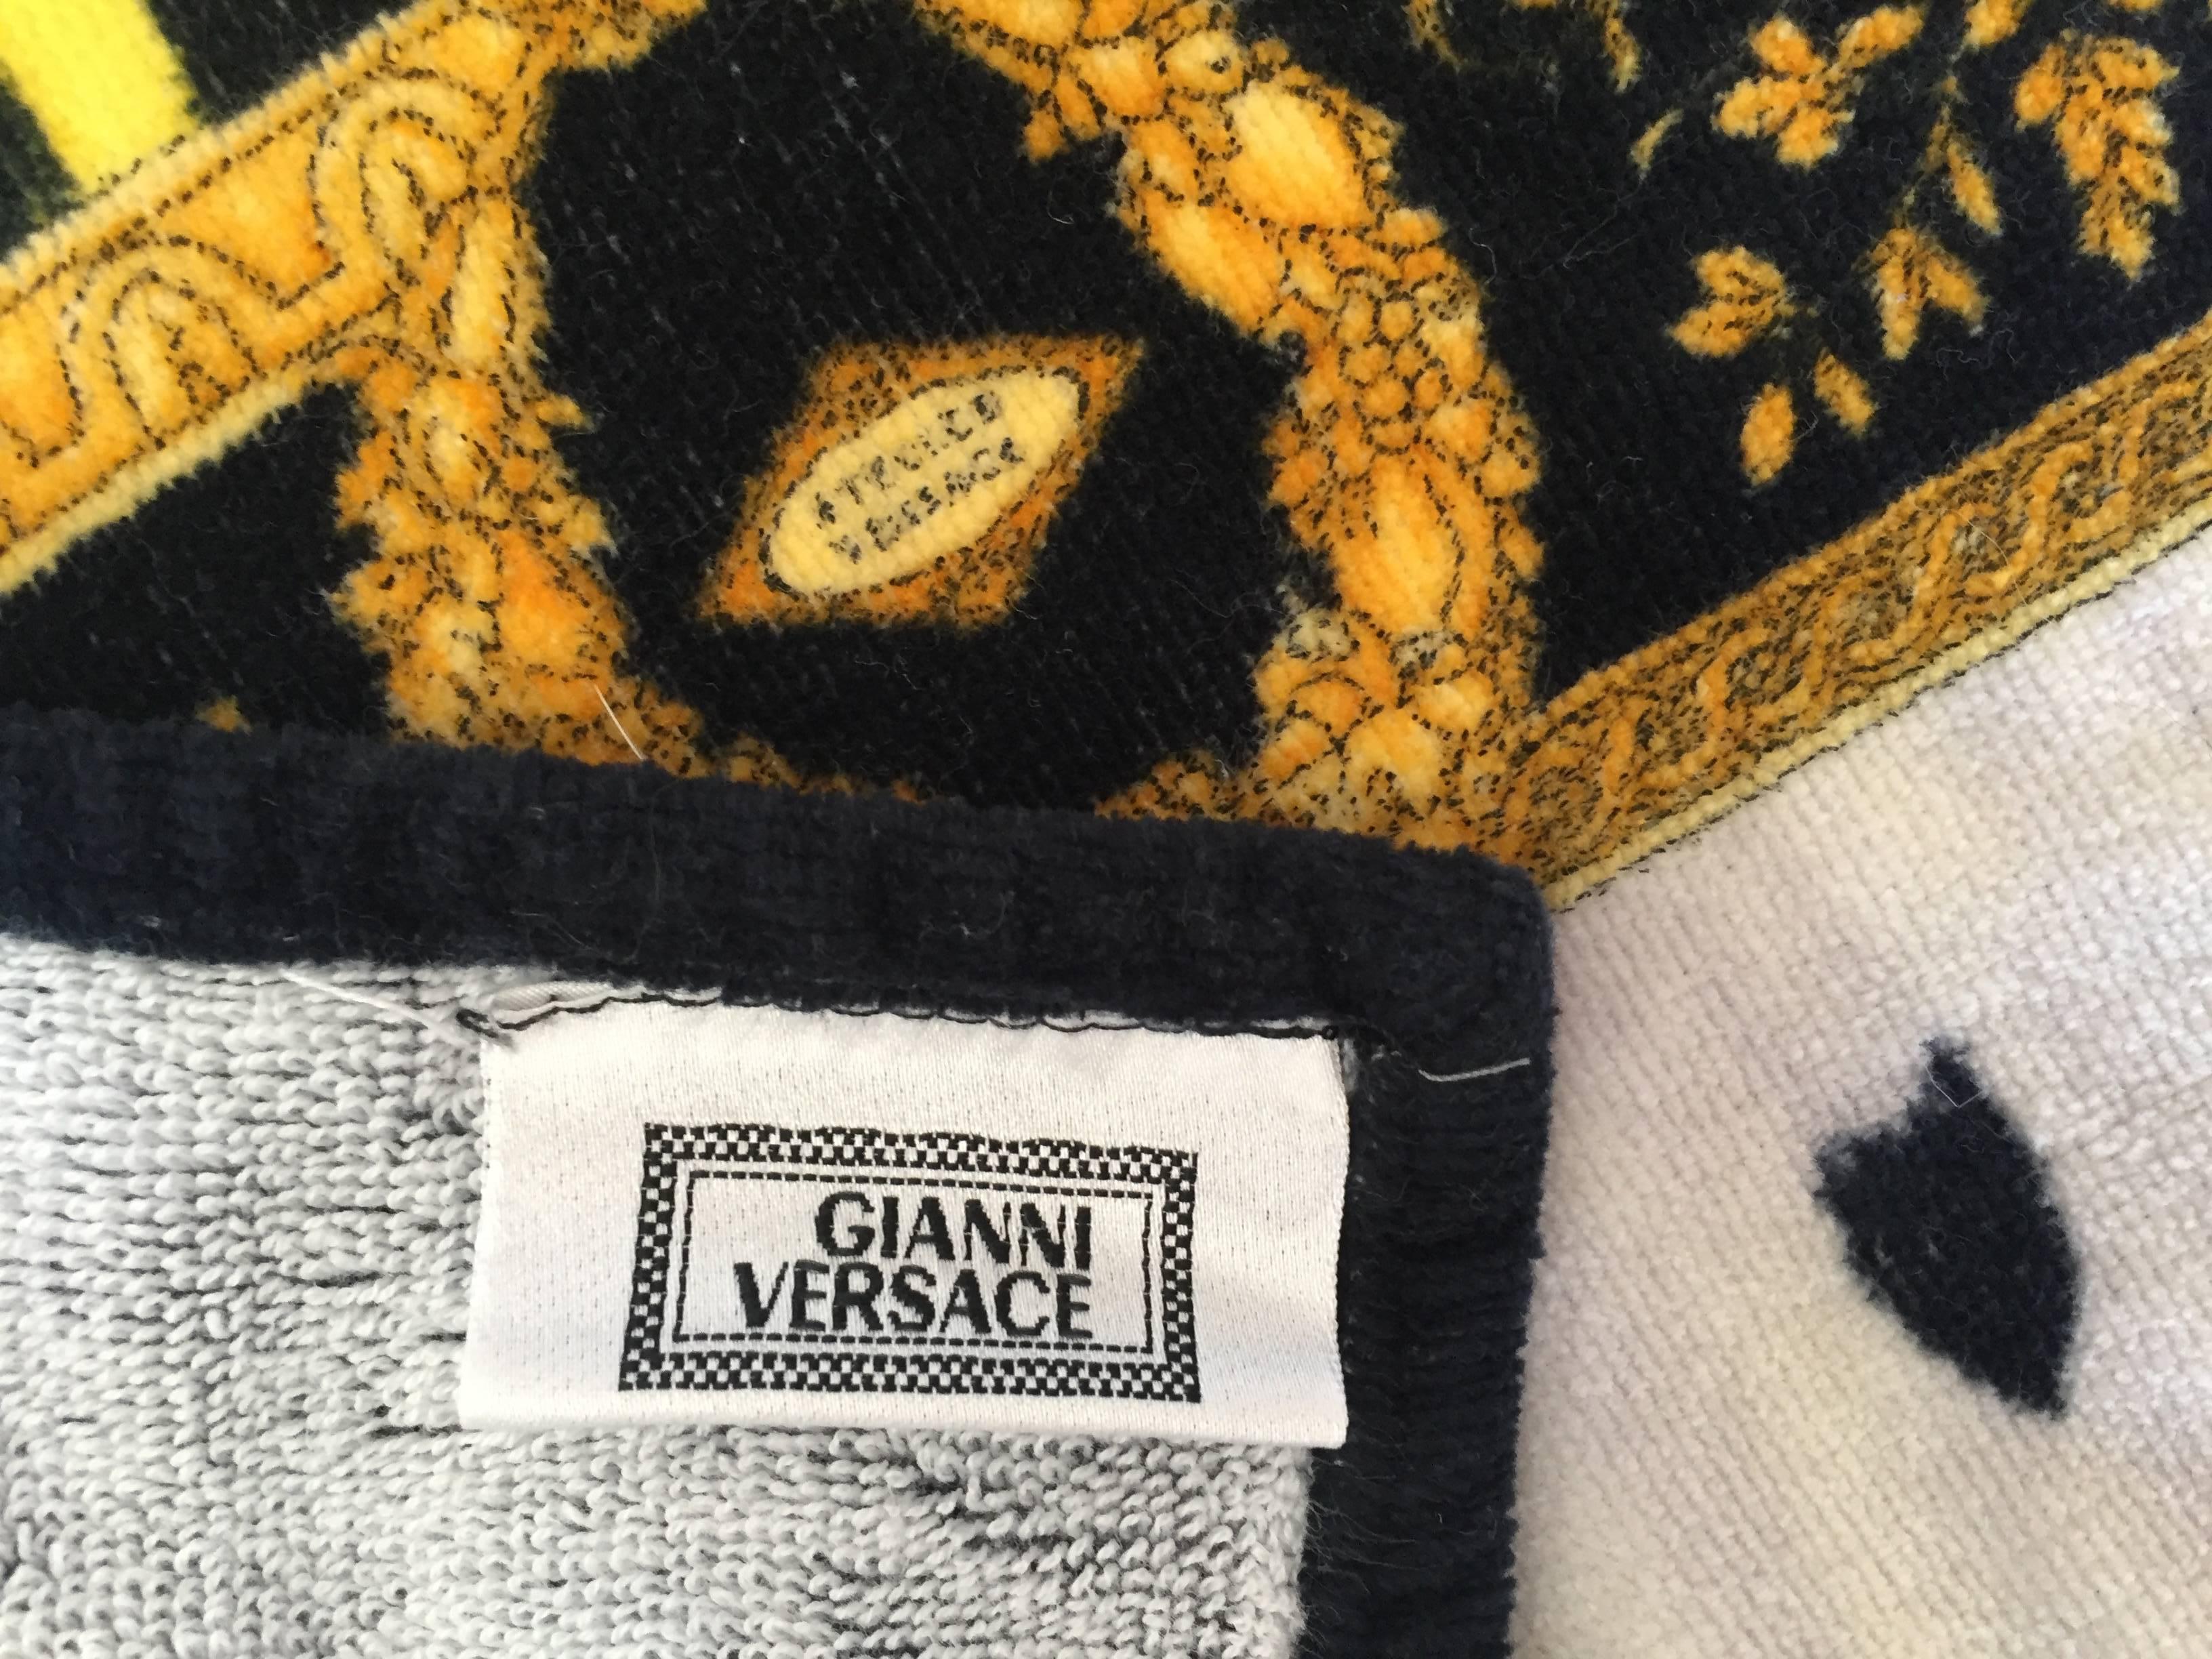 Atelier Versace Gianni Versace Vintage Beach Blanket / Towel.
Neo baroque animal and egyptian theme patterns on terry cloth.
58